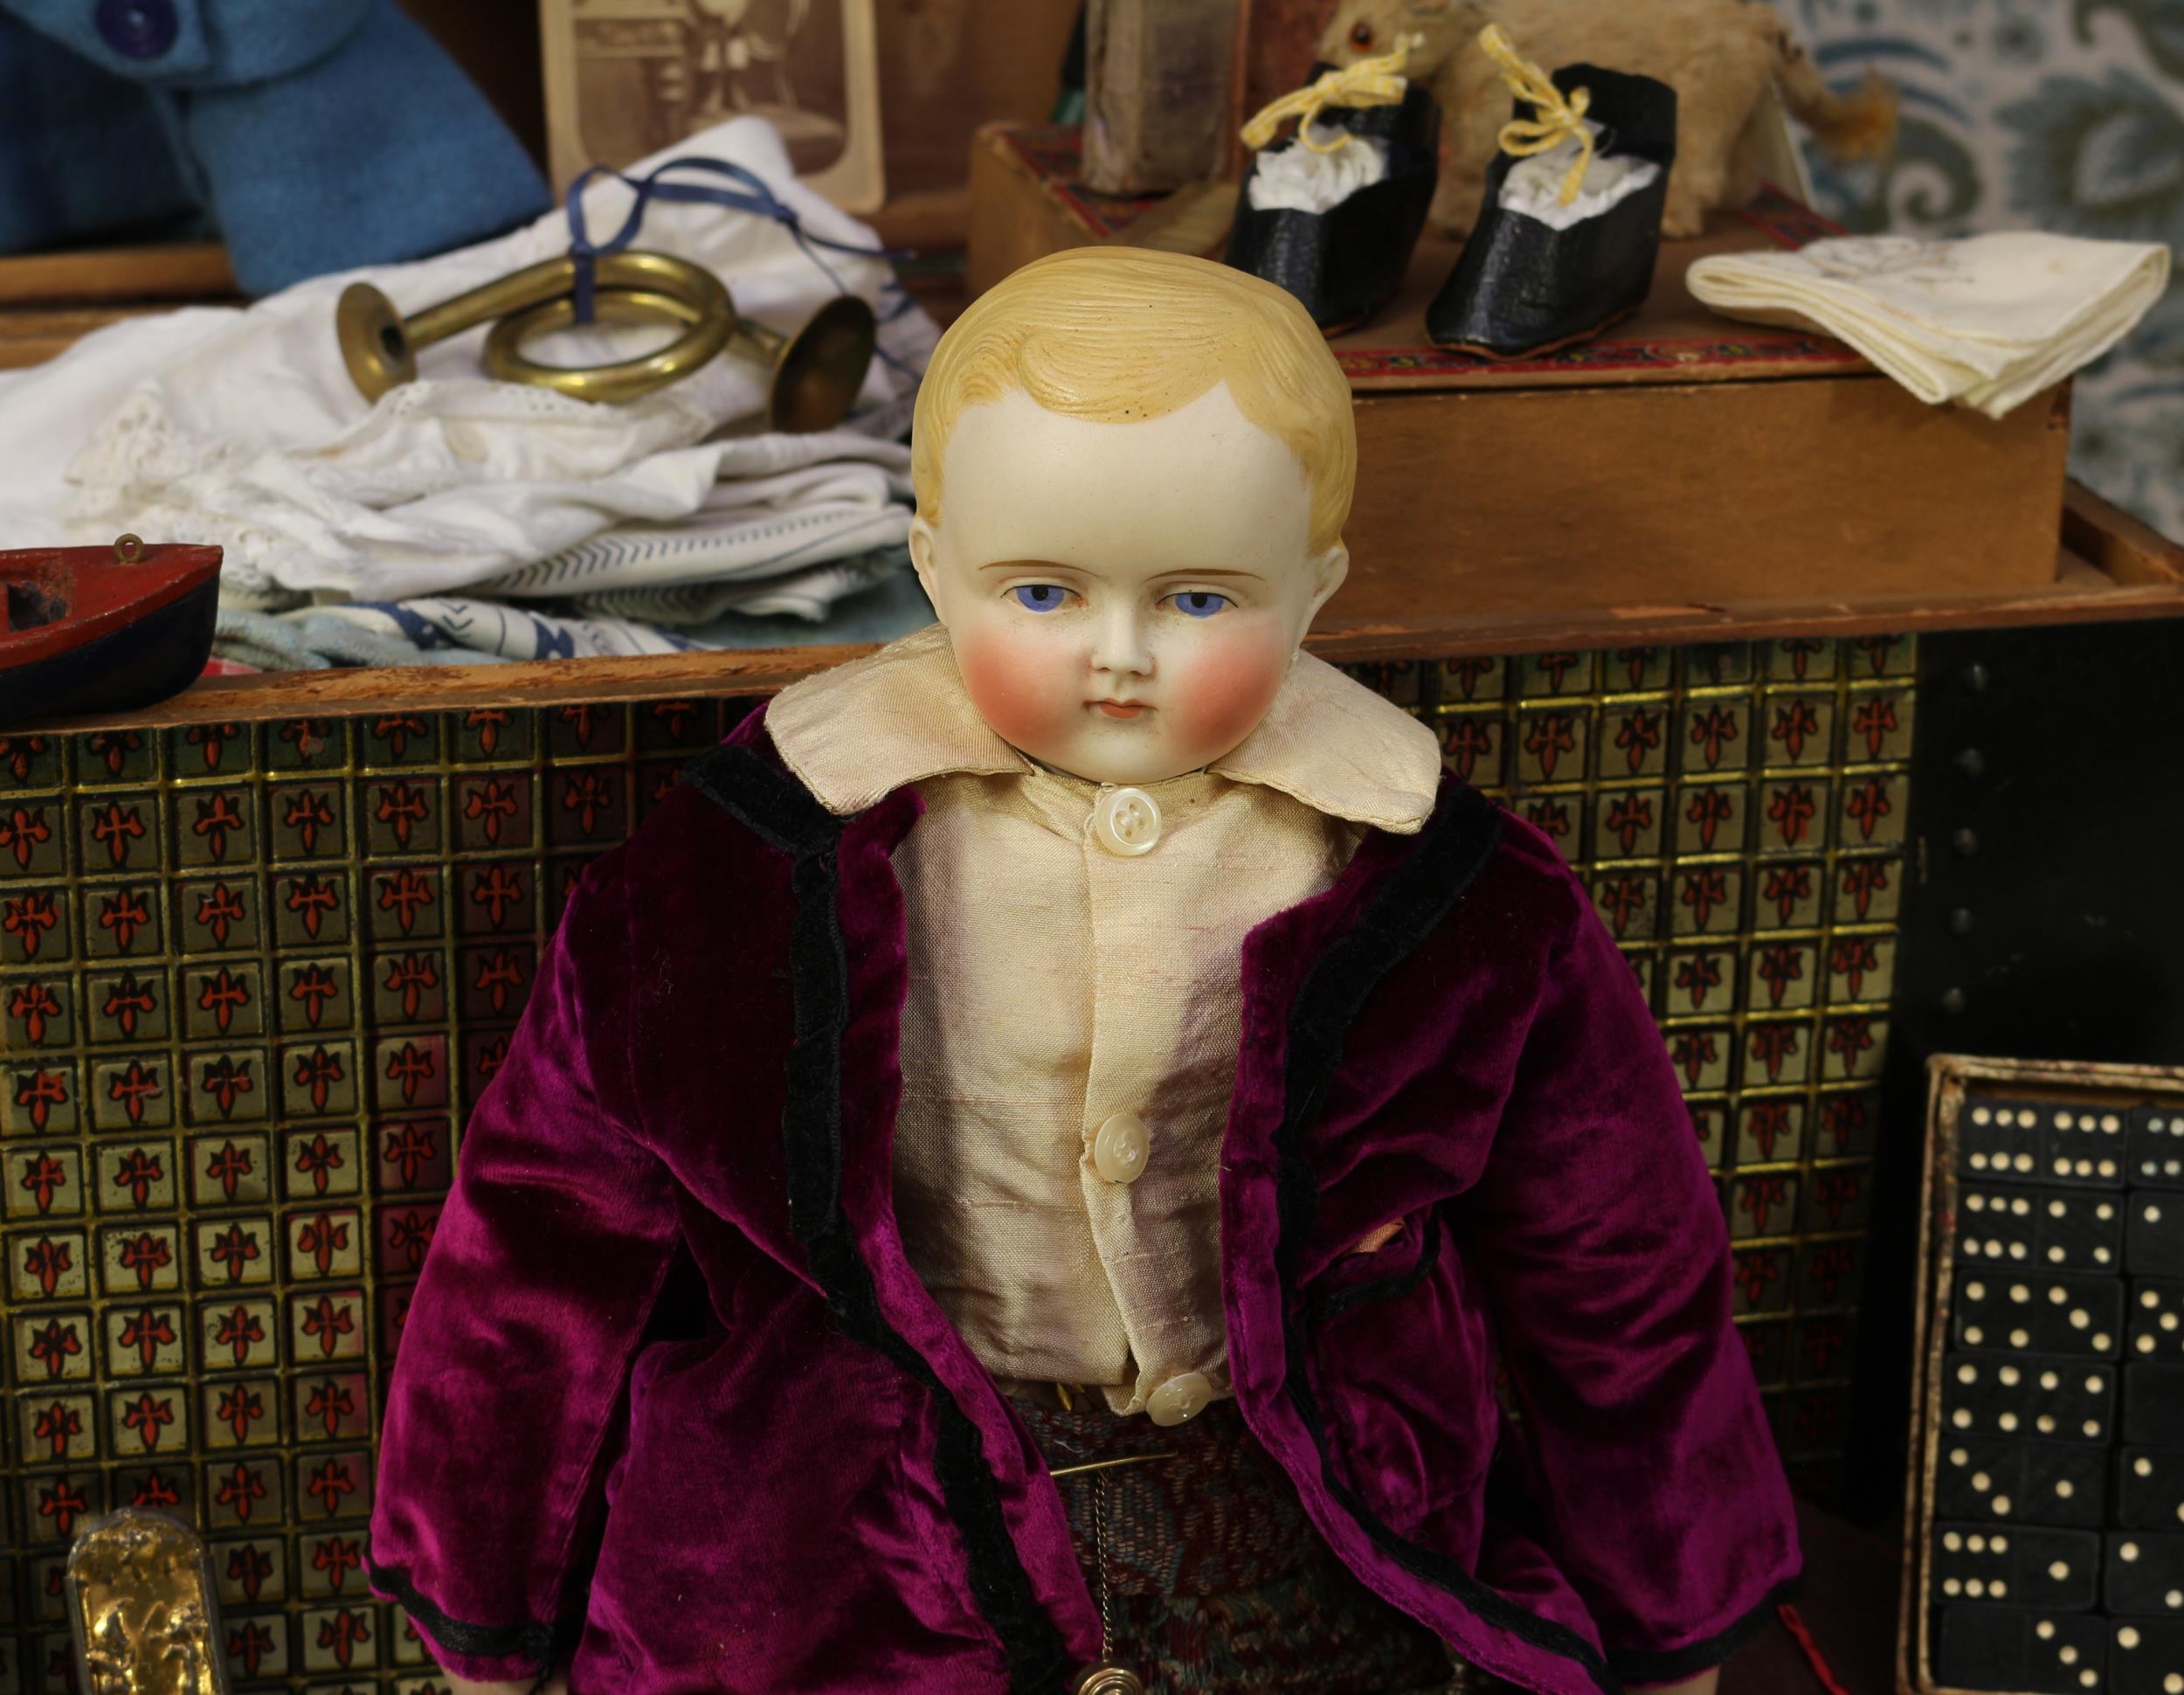 A late 19th century/early 20th century Parian type bisque shoulder head doll, as a Boy, probably - Image 2 of 4